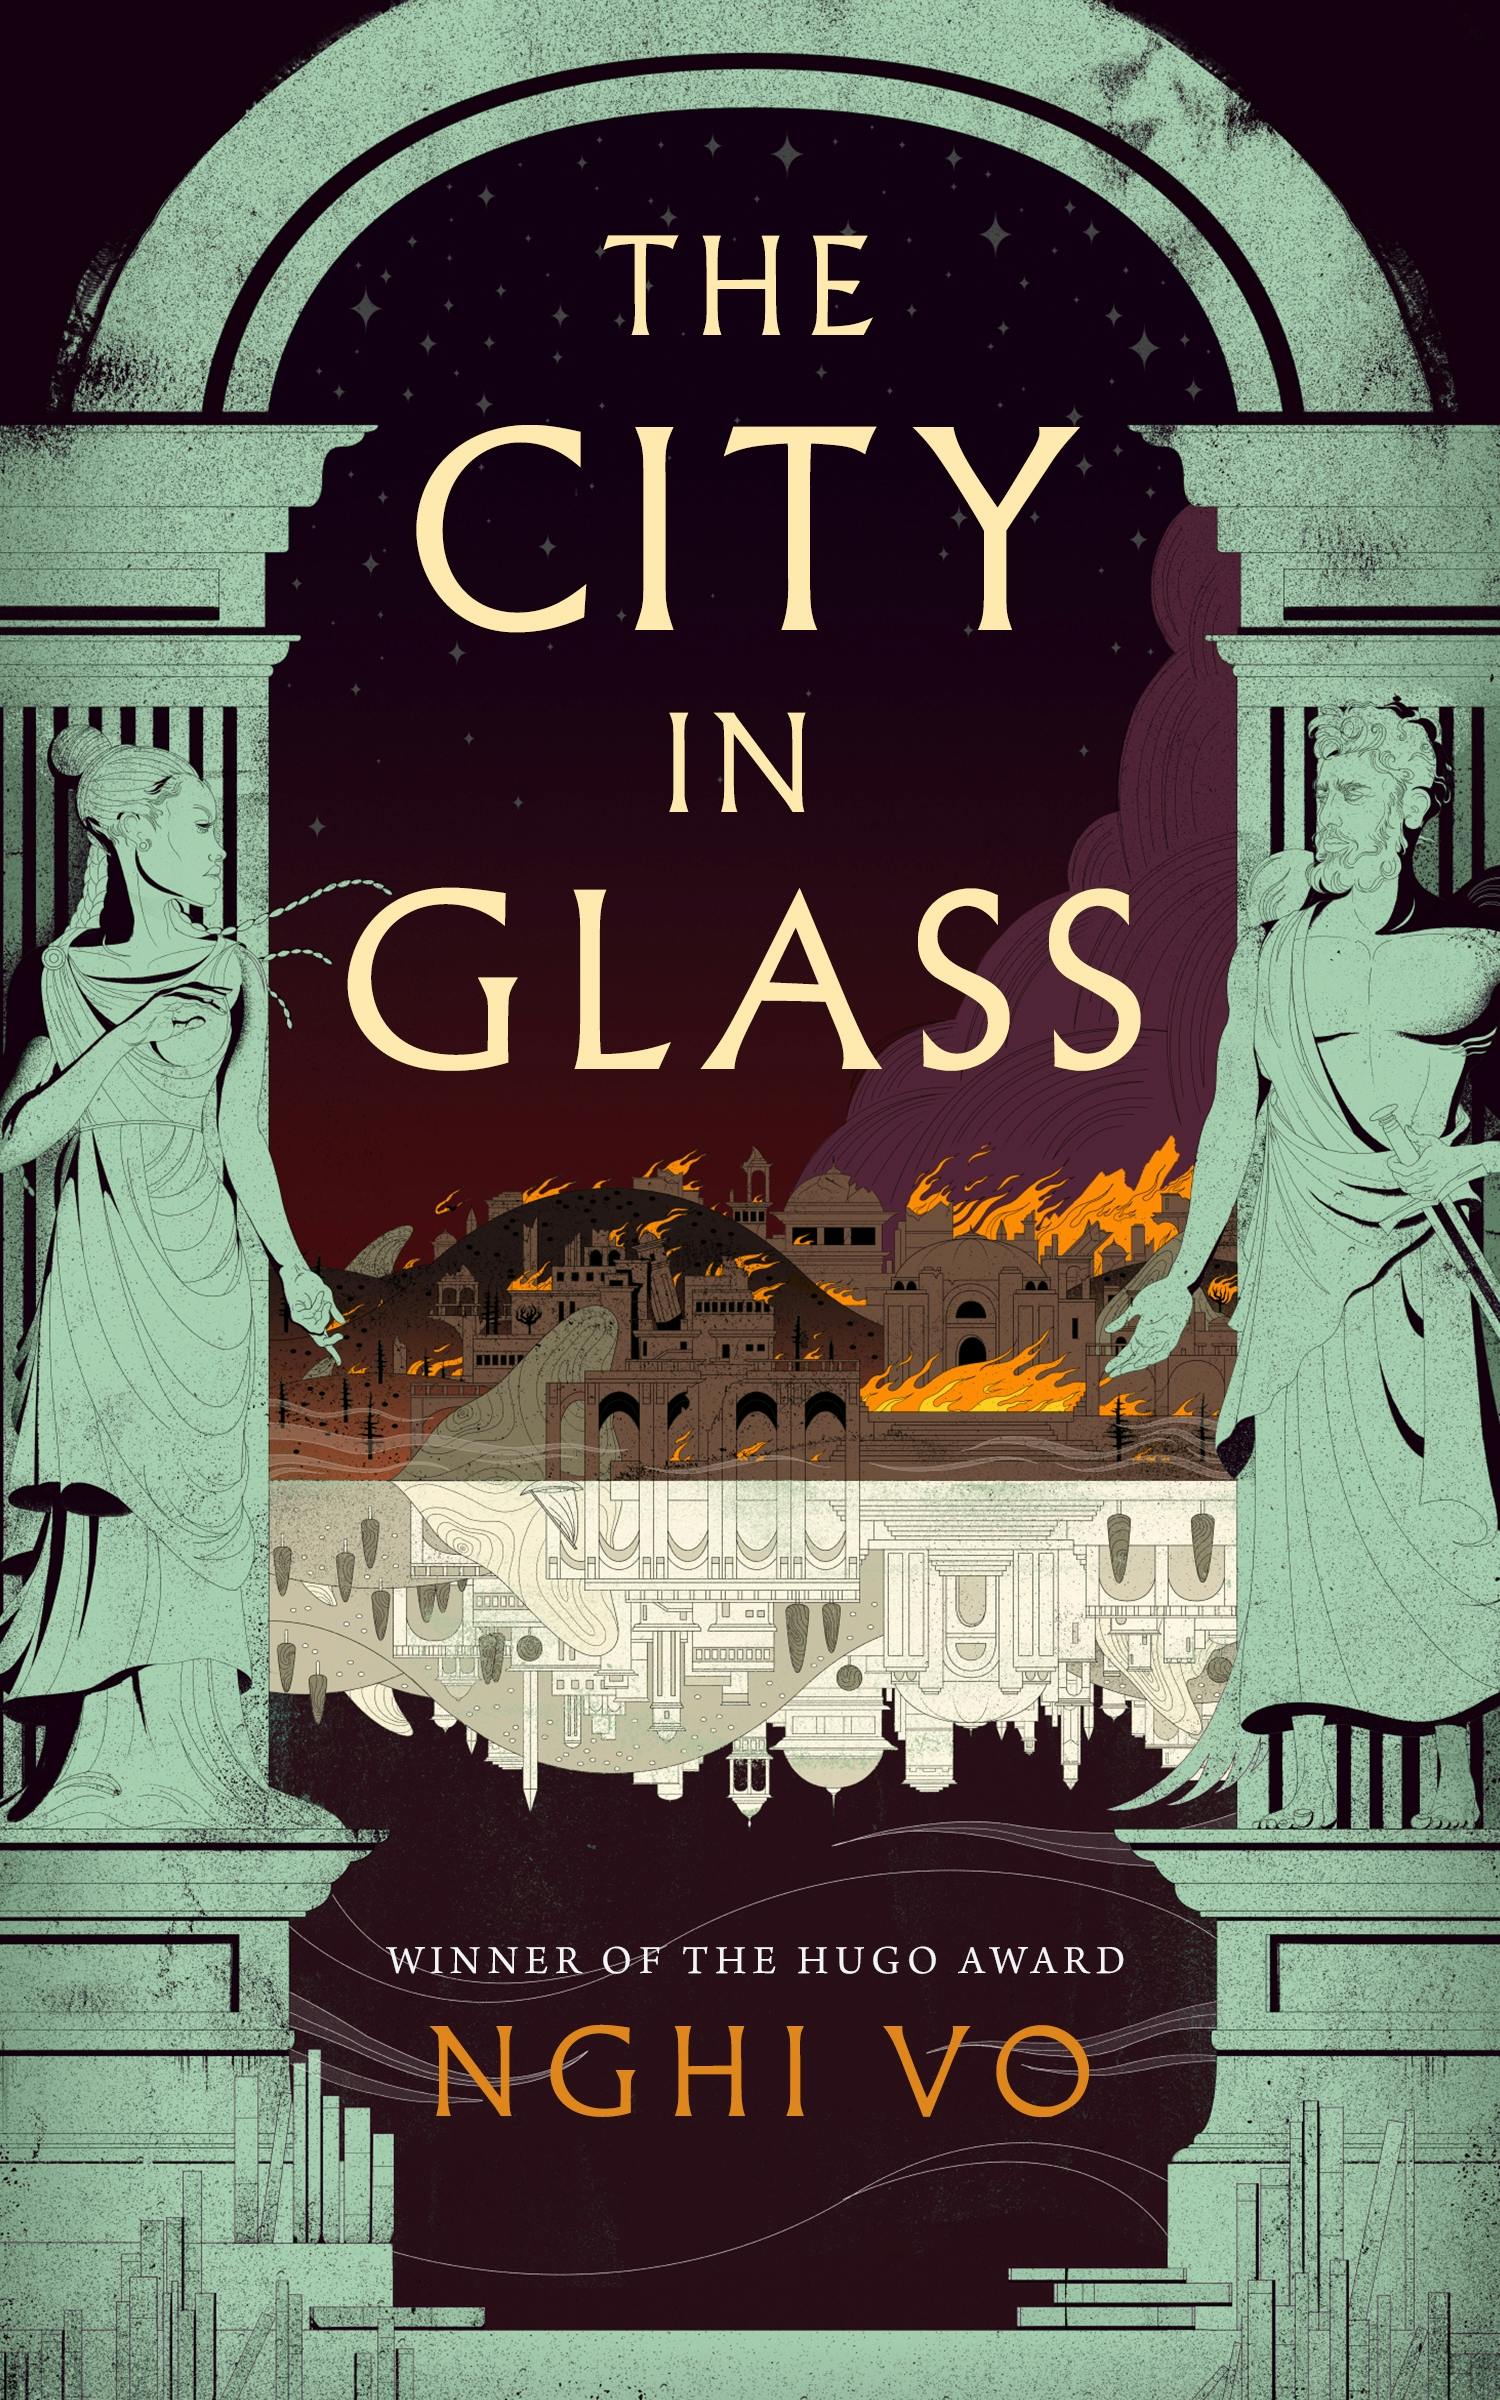 Cover for the book titled as: The City in Glass